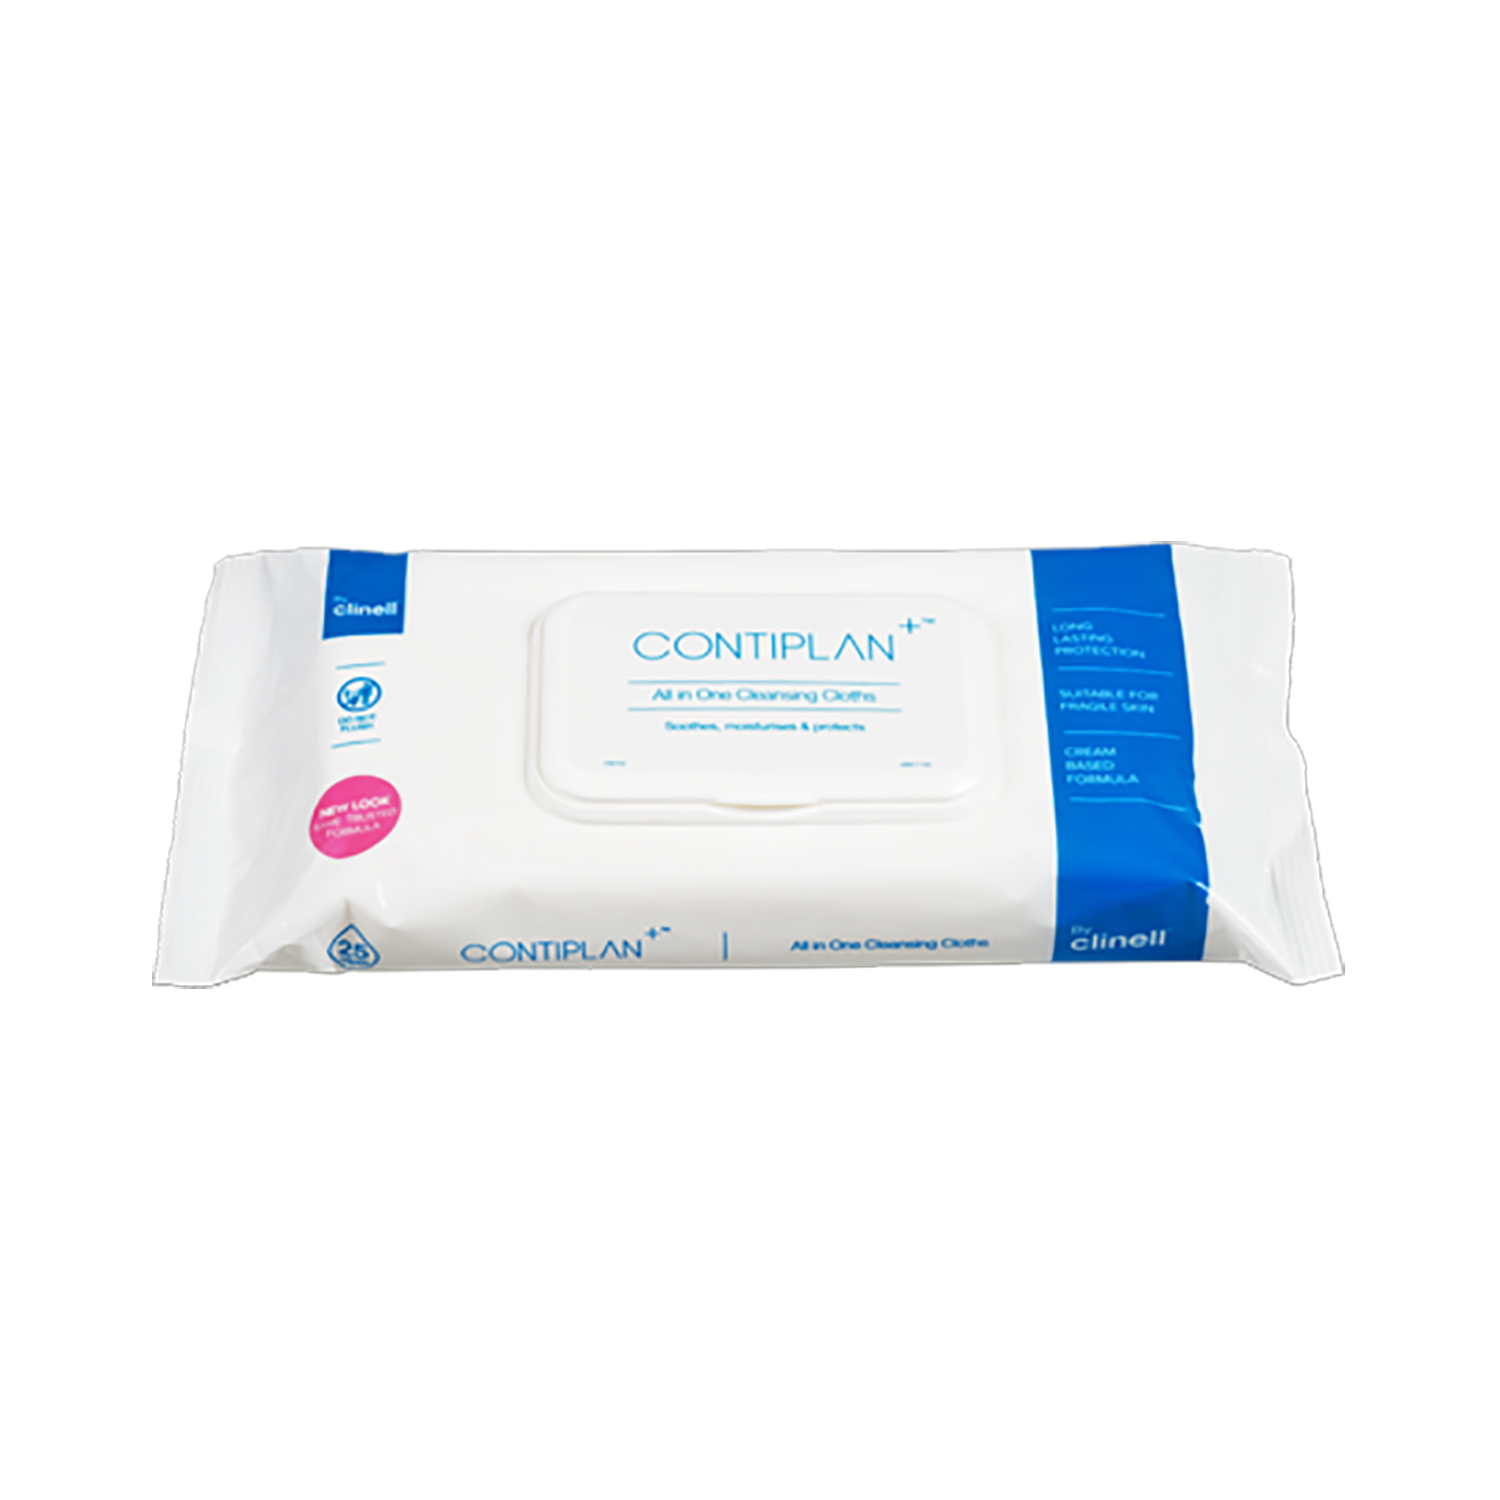 Clinell Contiplan All-in-One Cleansing Cloths | Packet of 25